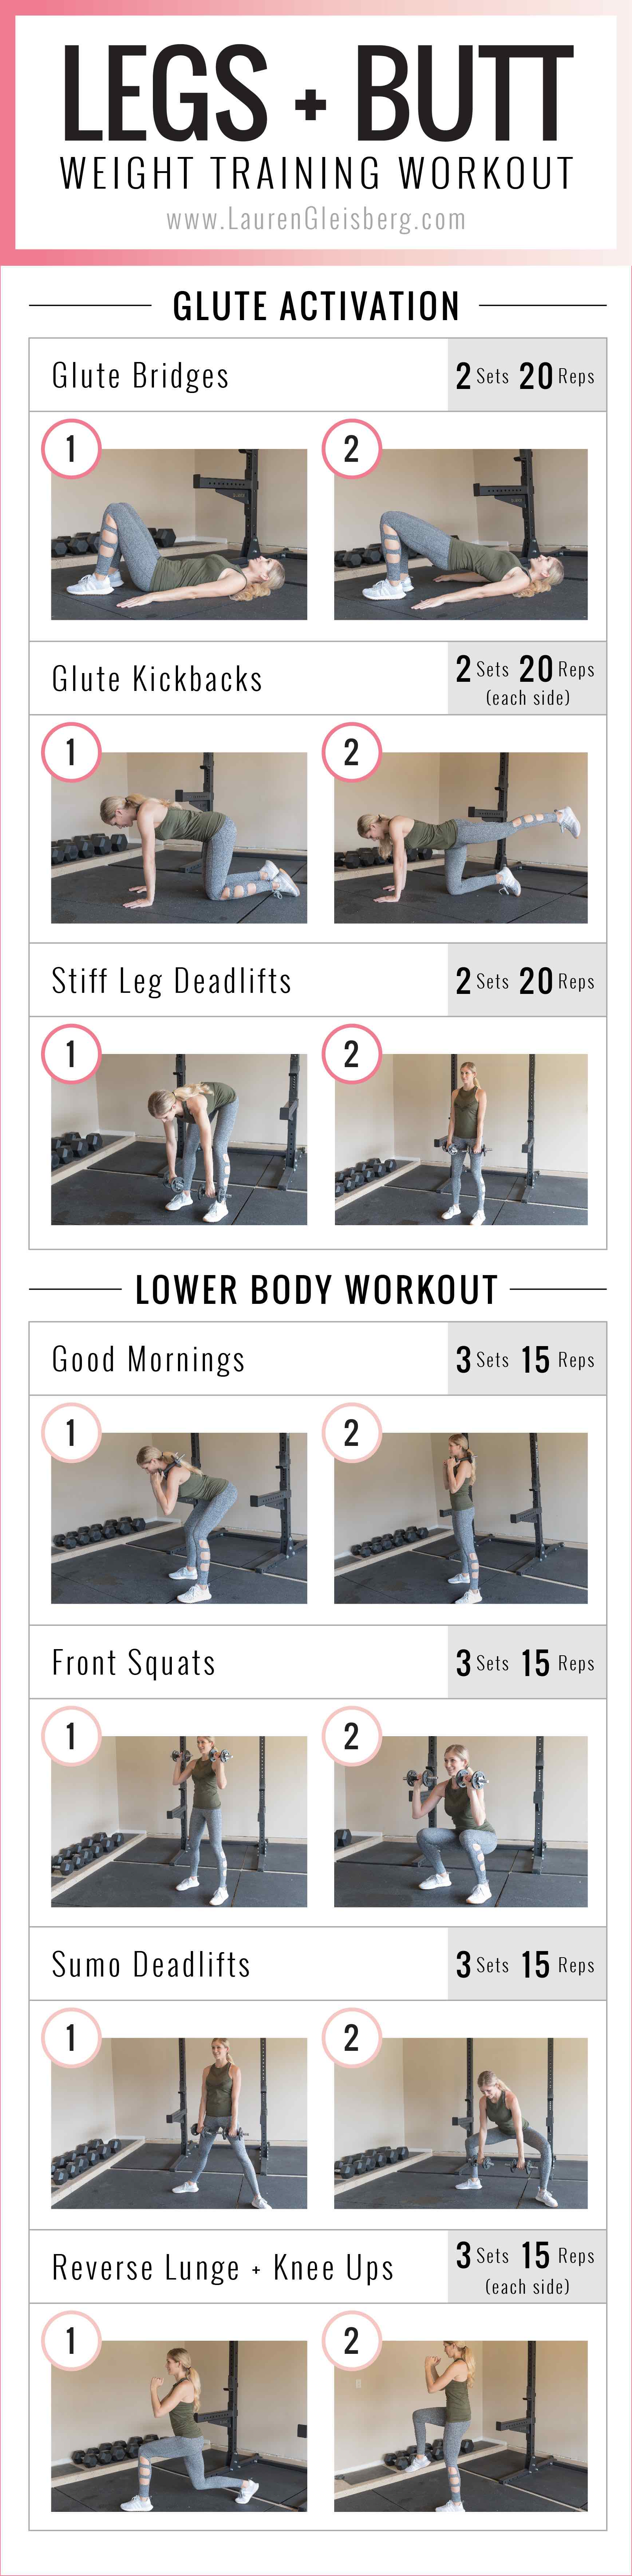 leg and butt at home gym workout women